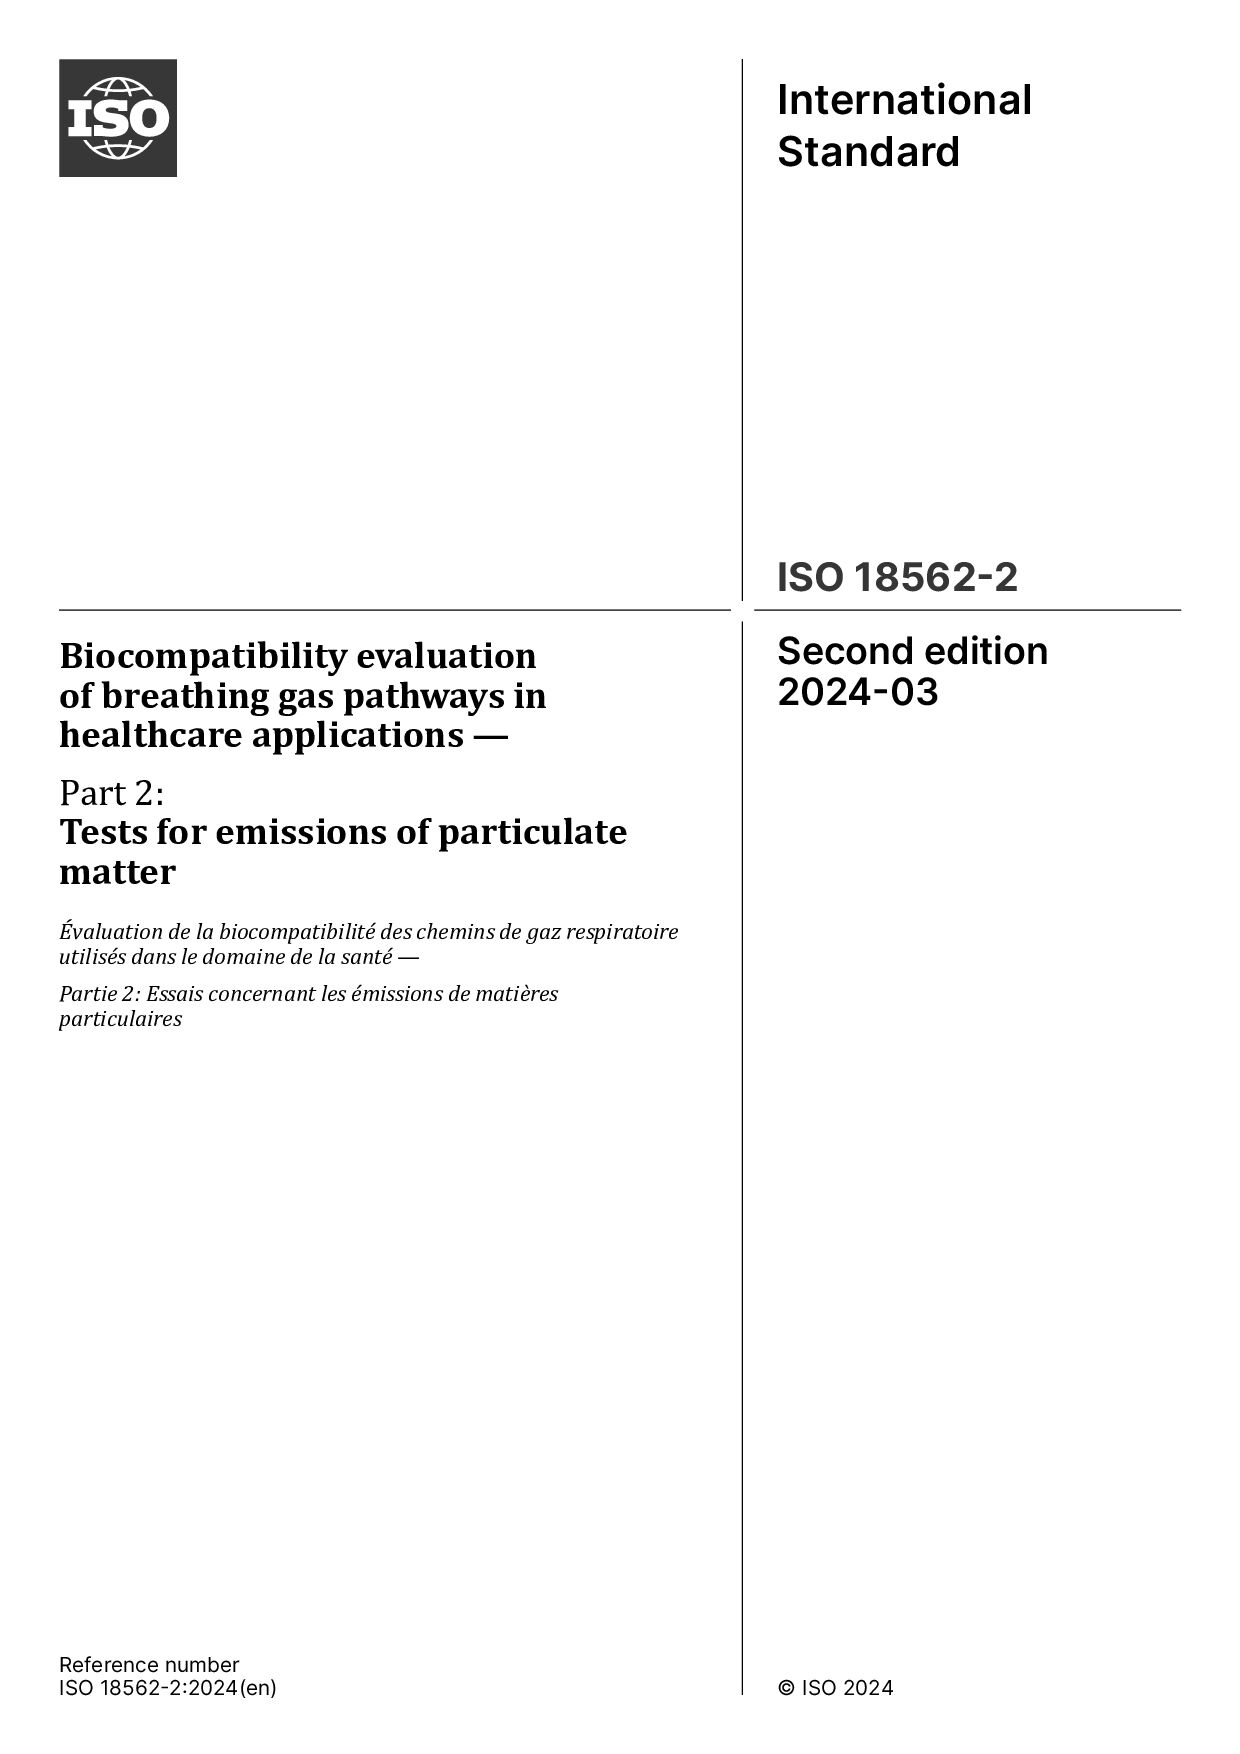 ISO 18562-2:2024